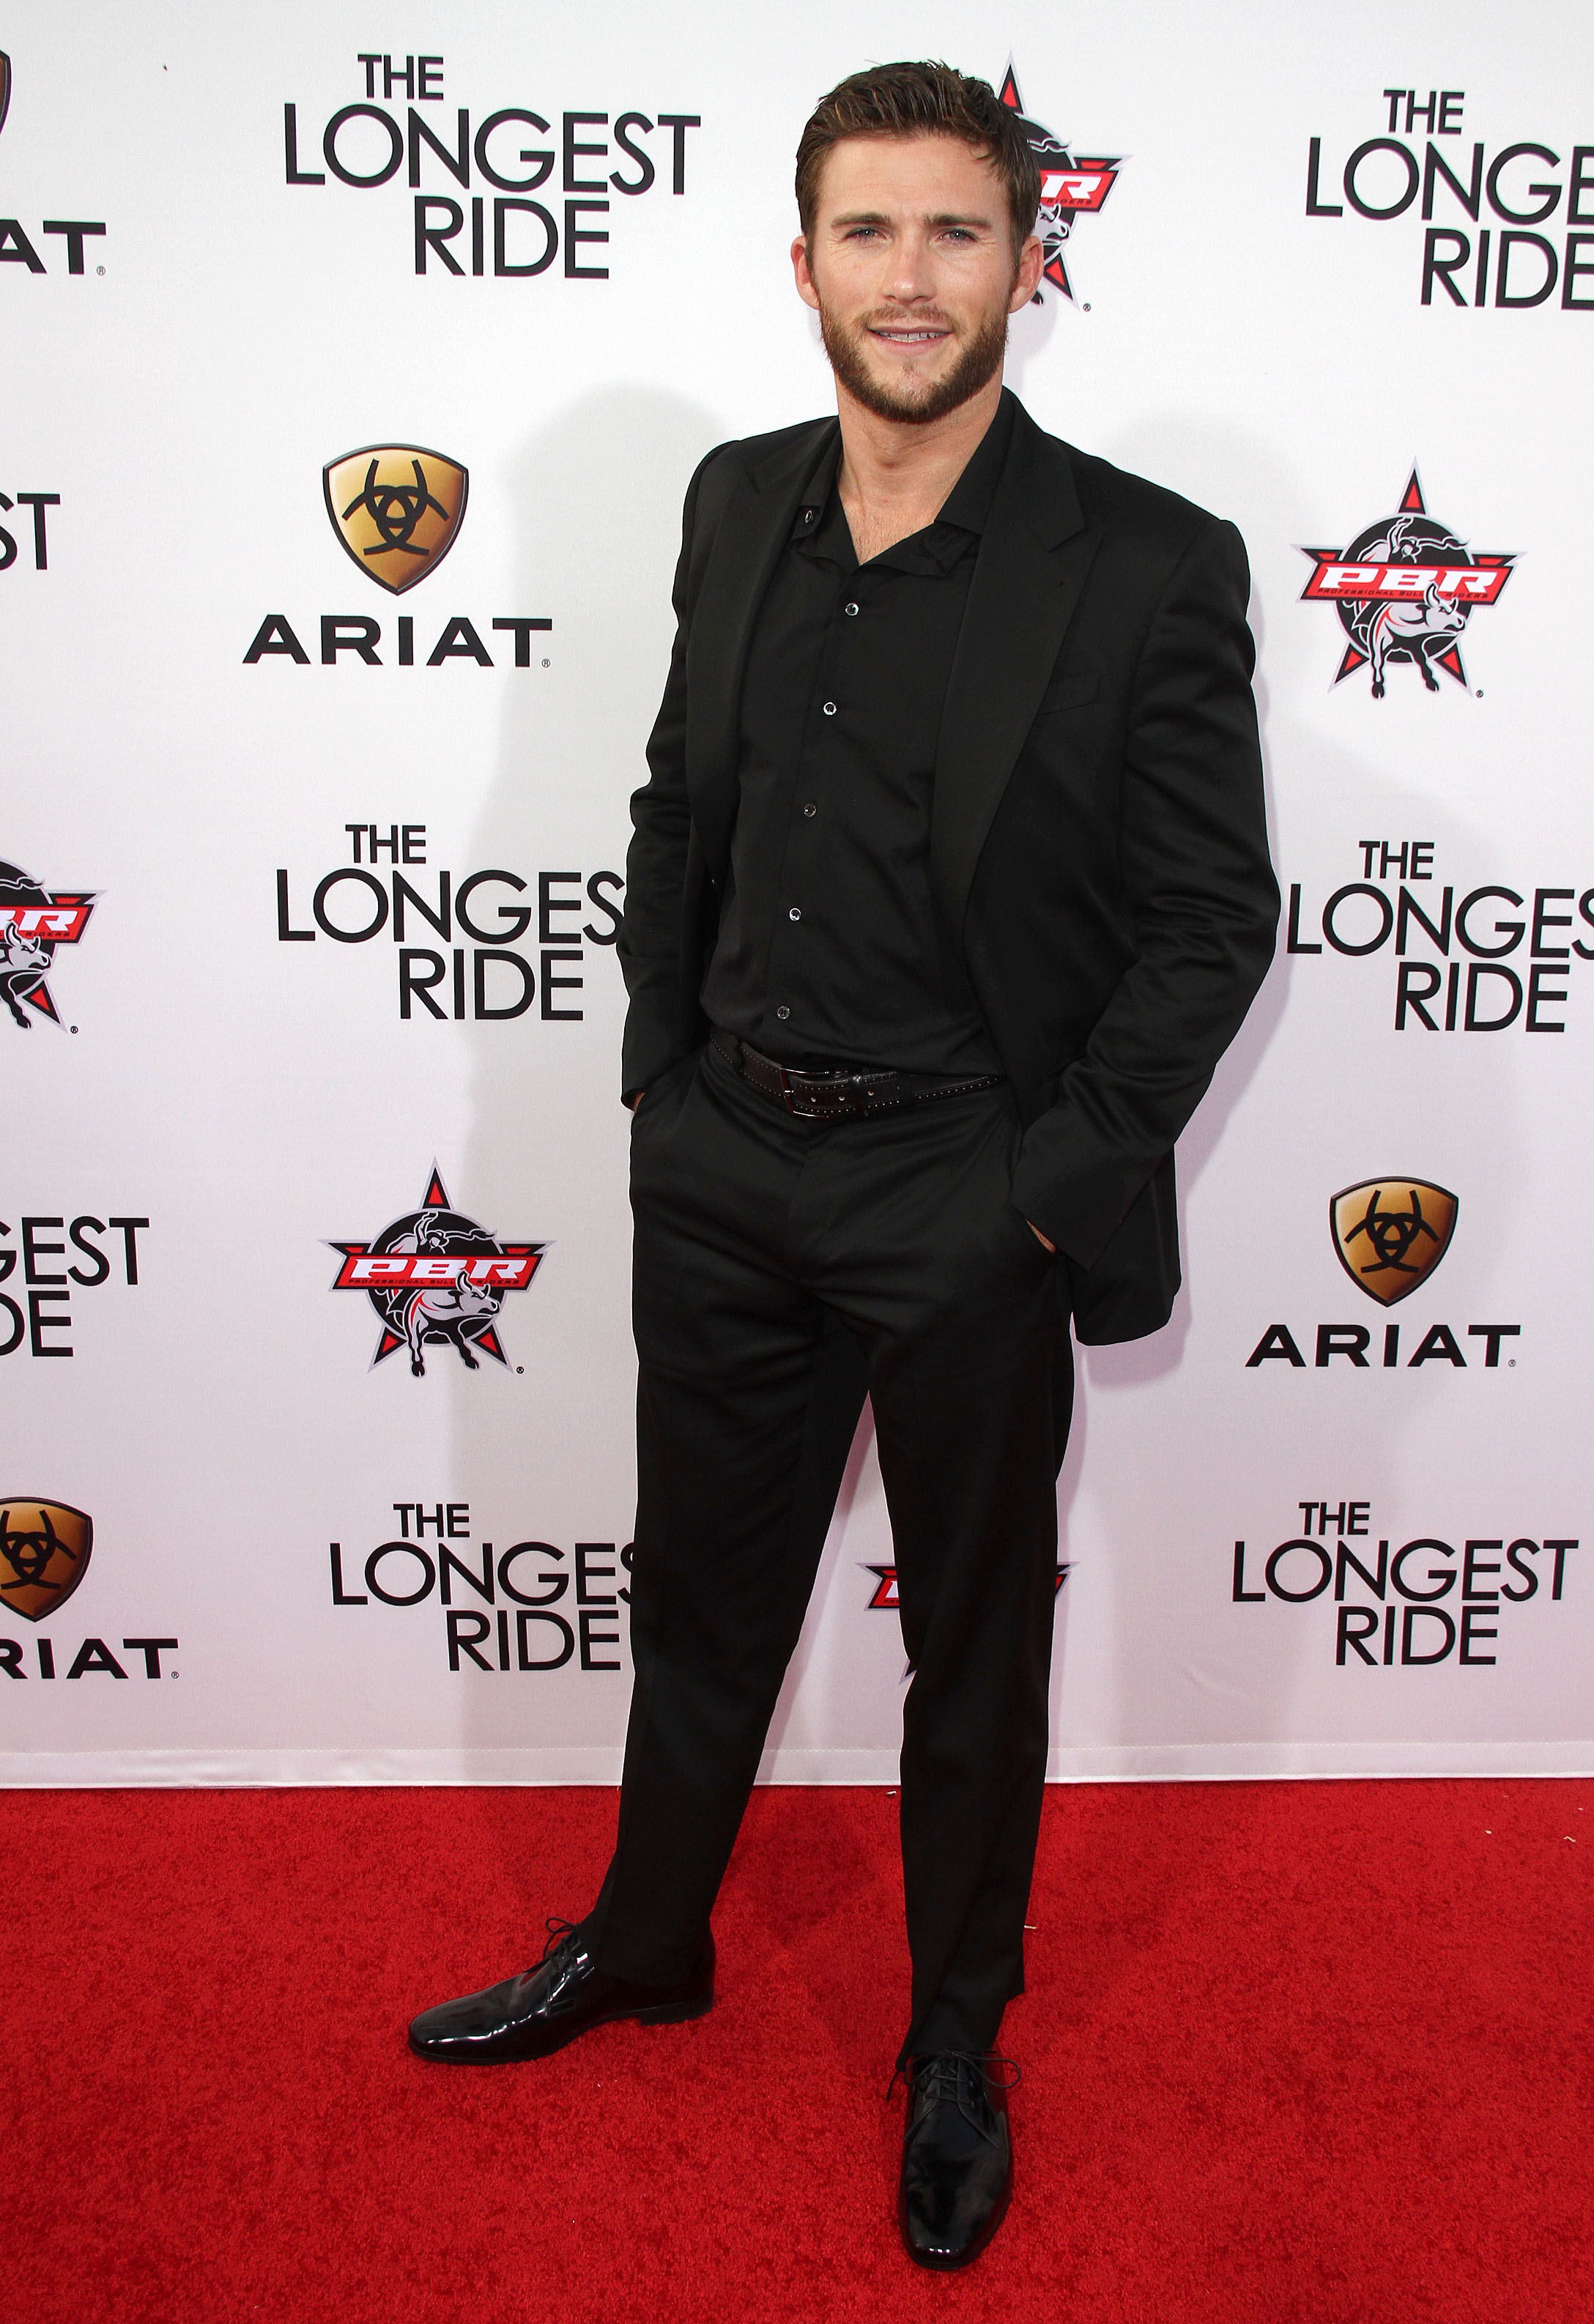 Your Afternoon Man: Scott Eastwood at “The Longest Ride” premiere